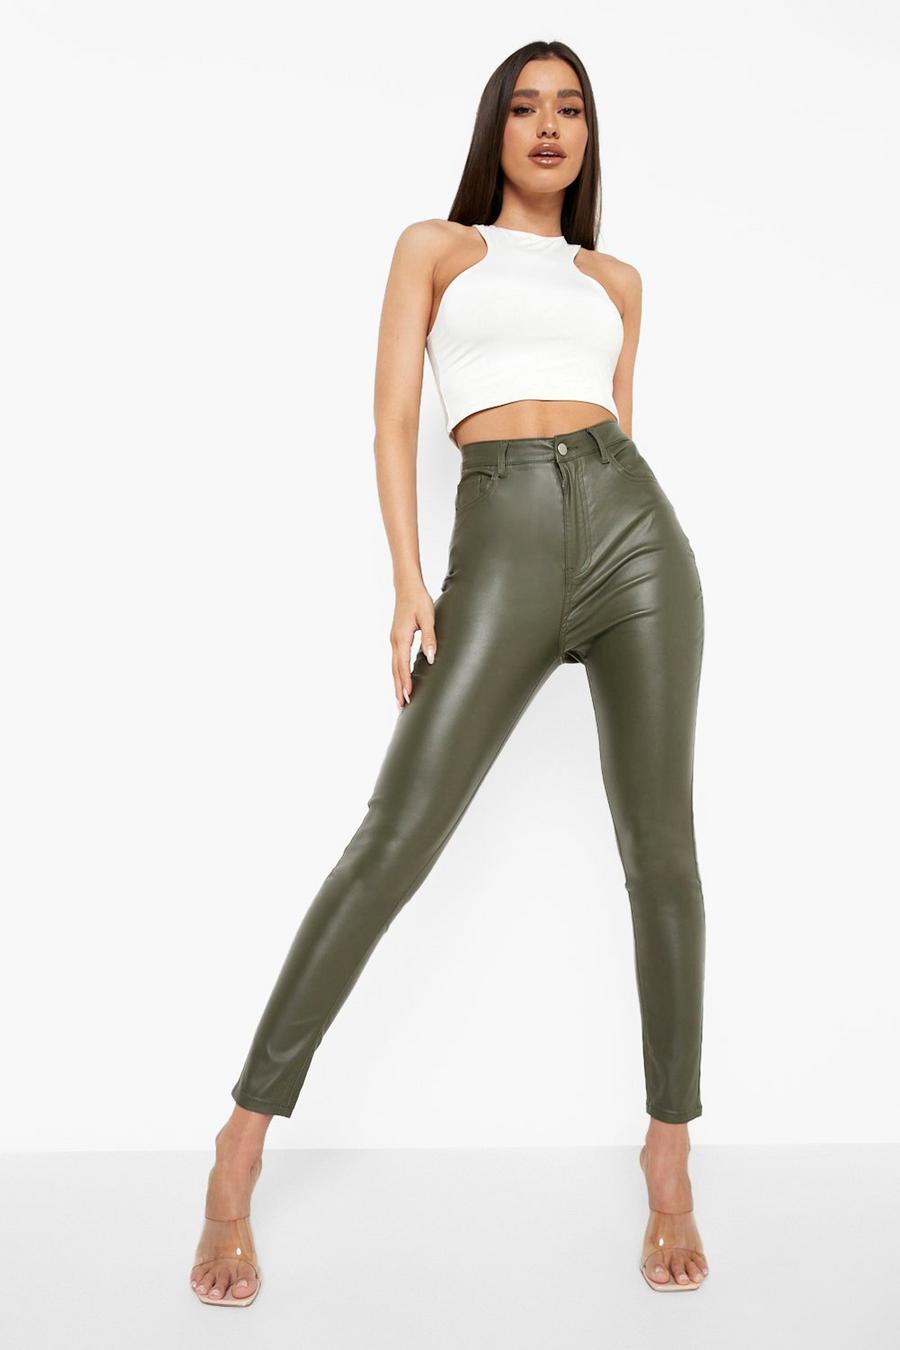 Khaki Faux Leather High Waist Skinny Jeans image number 1